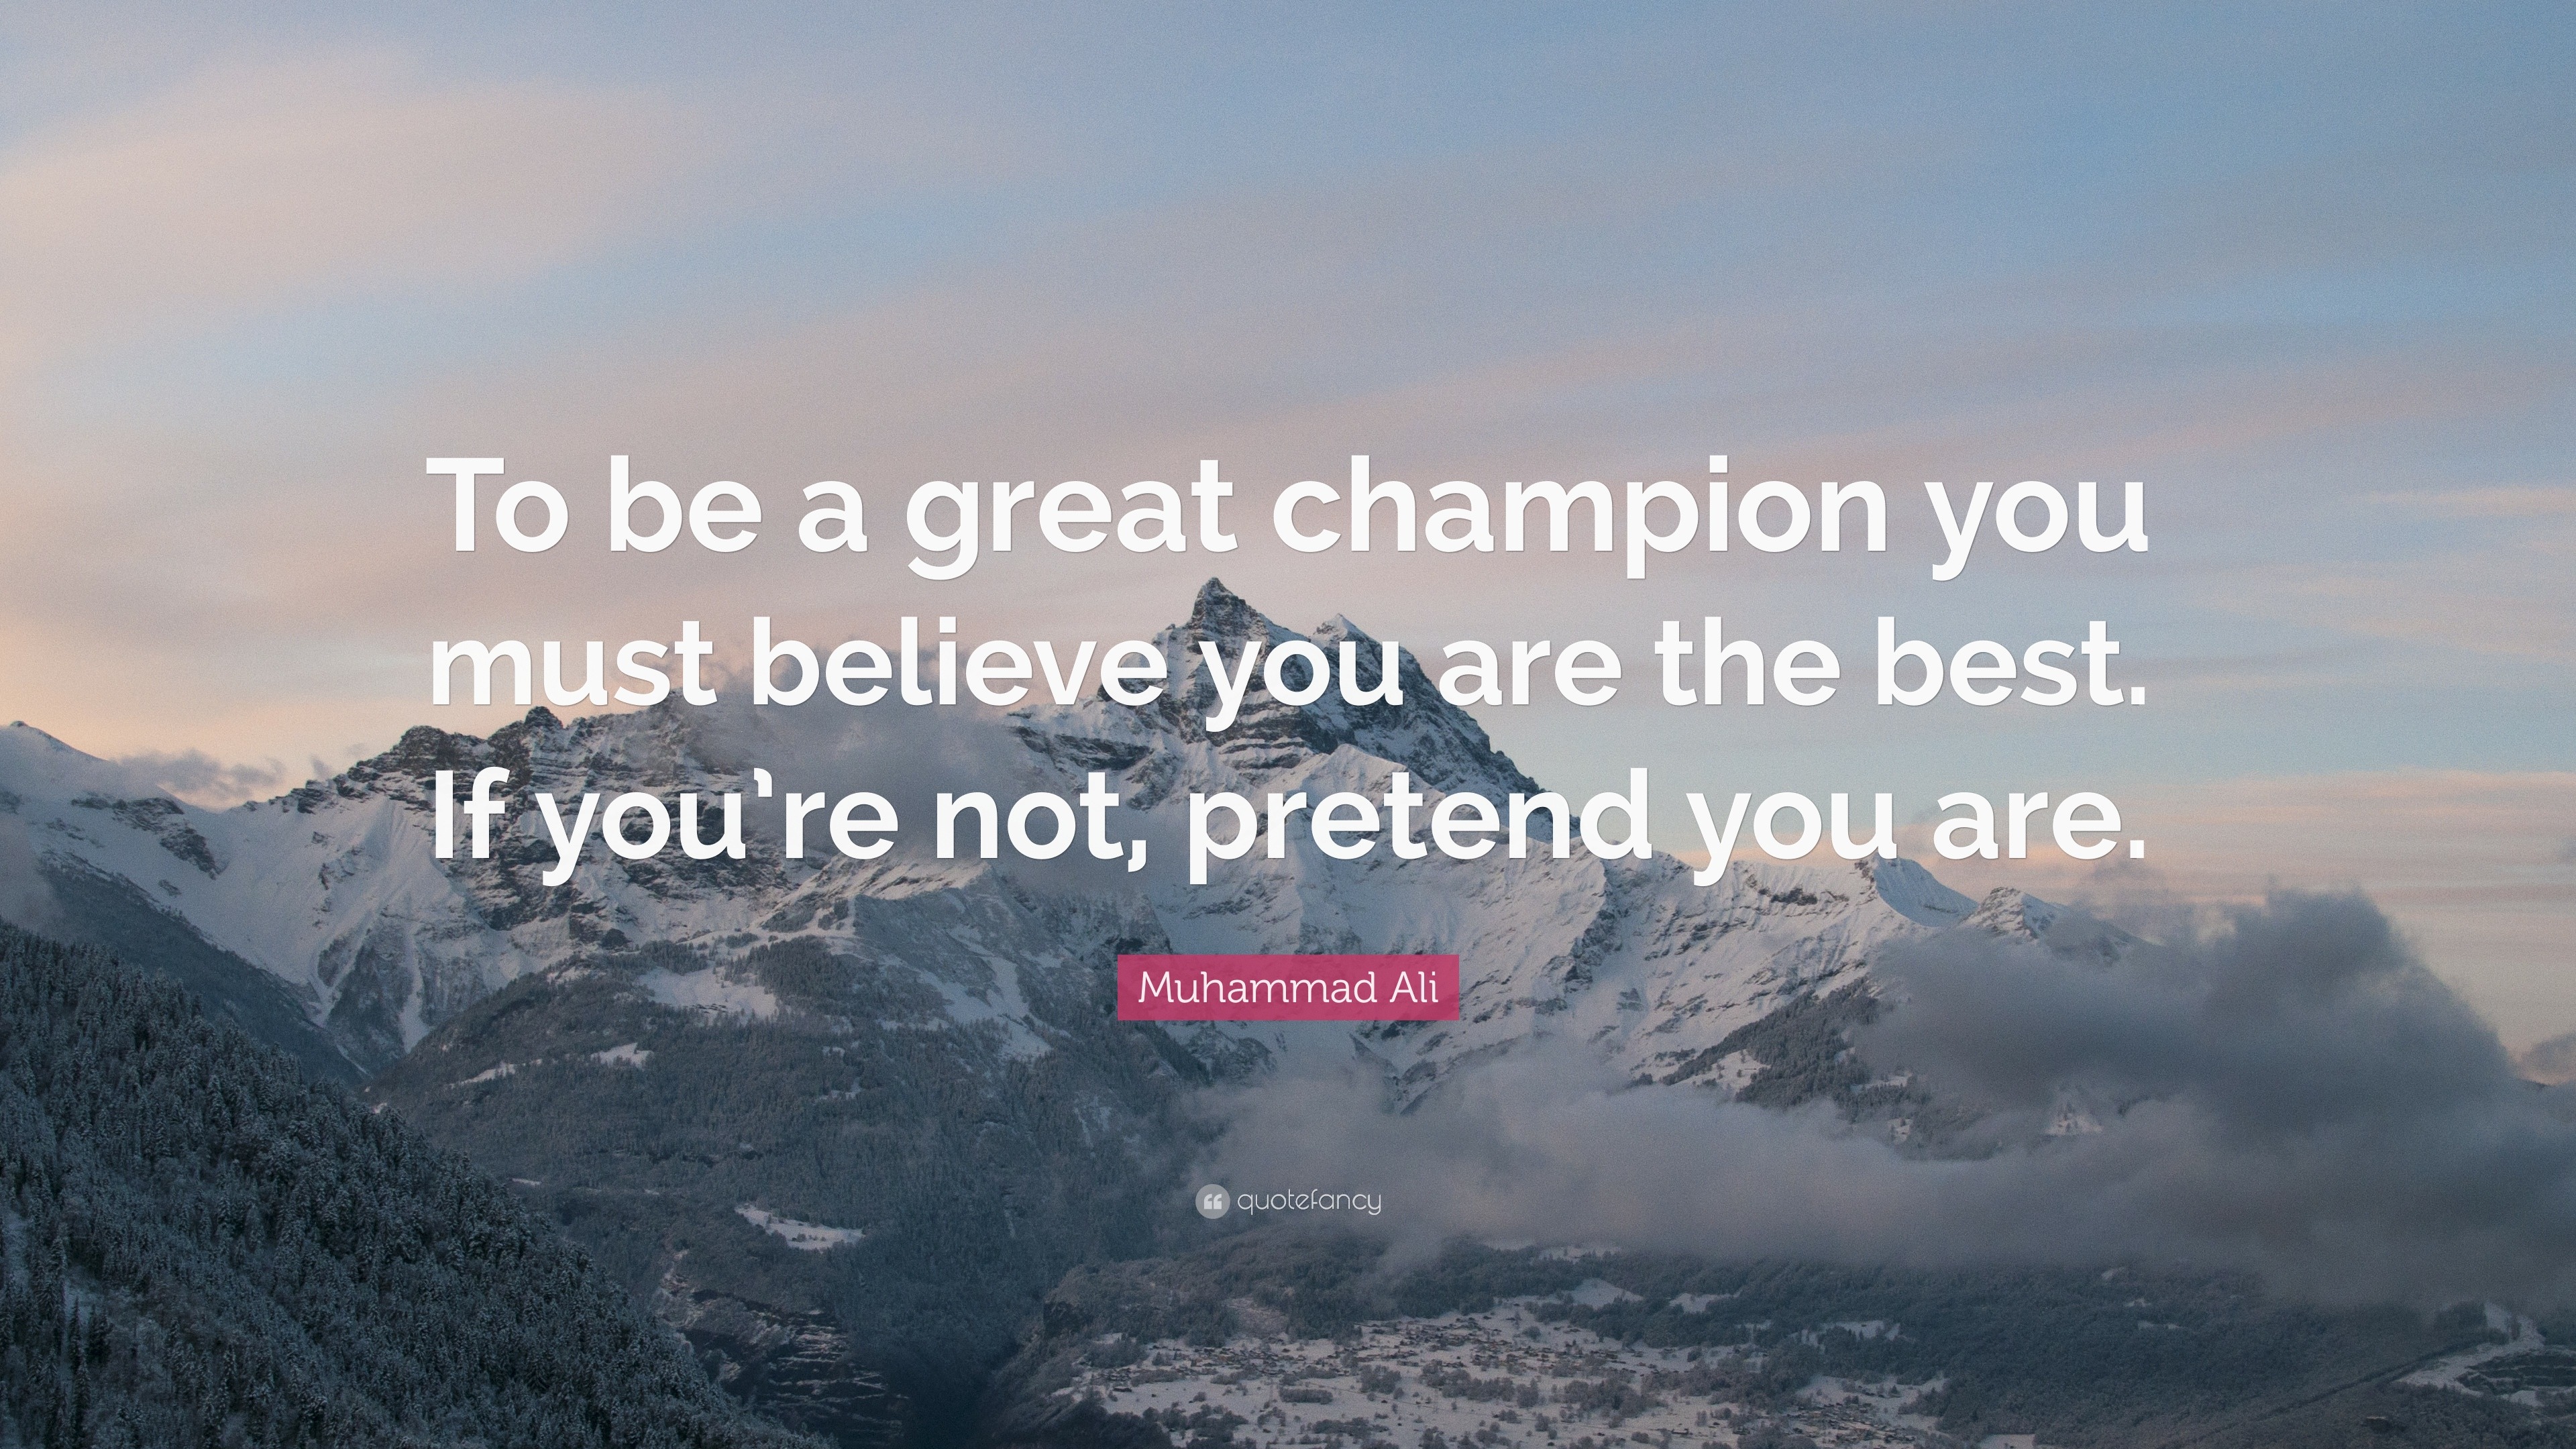 Muhammad Ali Quote: “To be a great champion you must believe you are